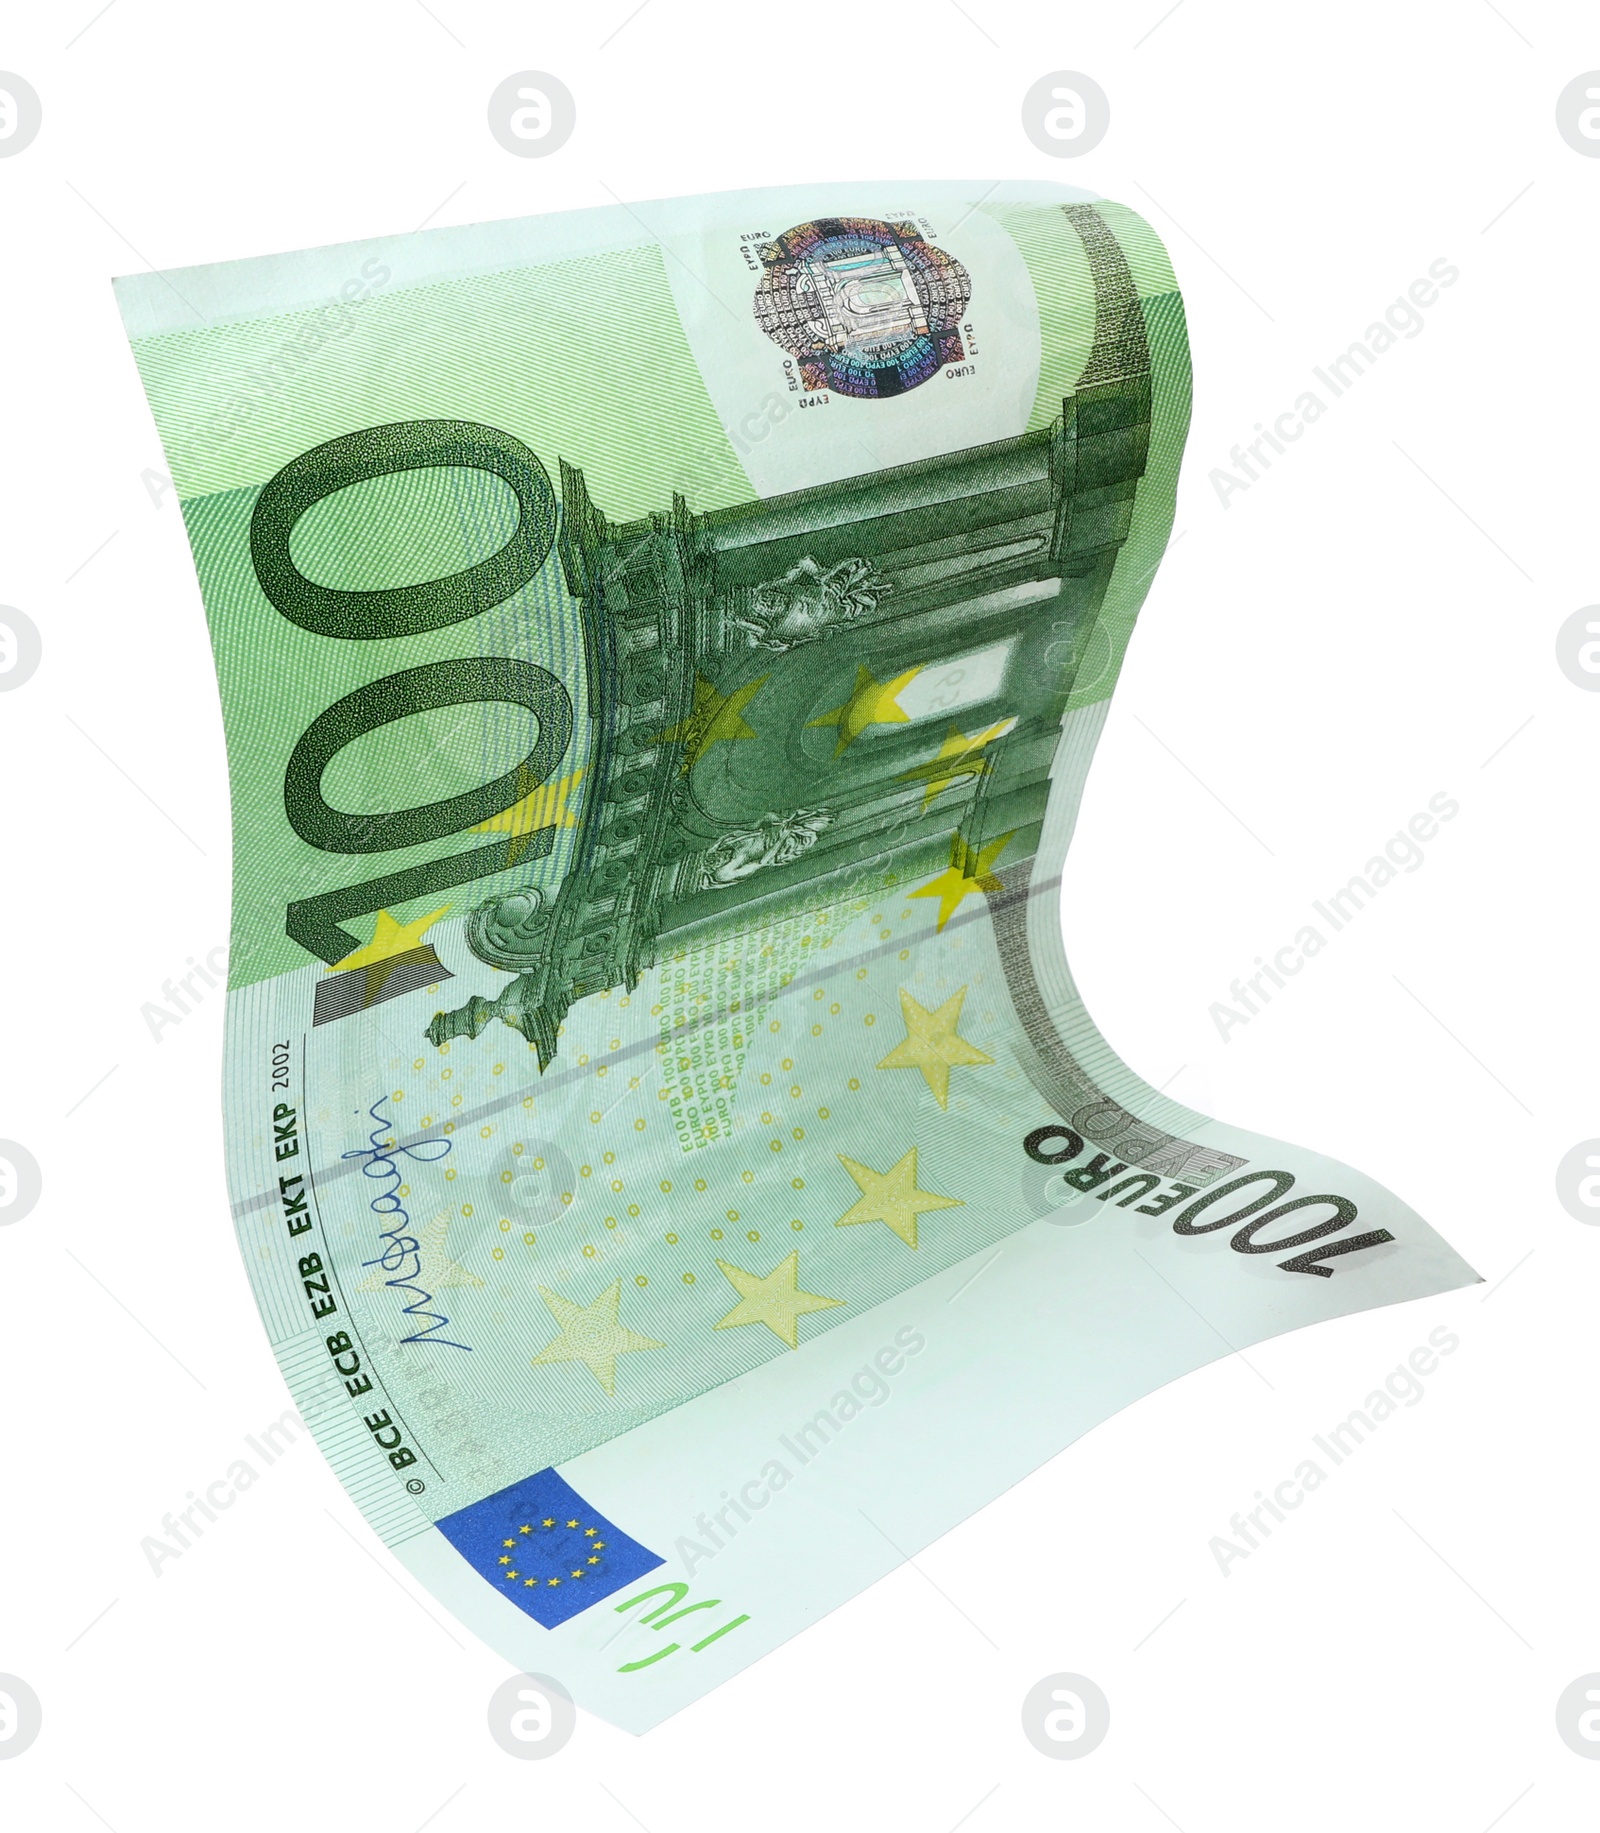 Photo of Flying one hundred Euro banknote isolated on white